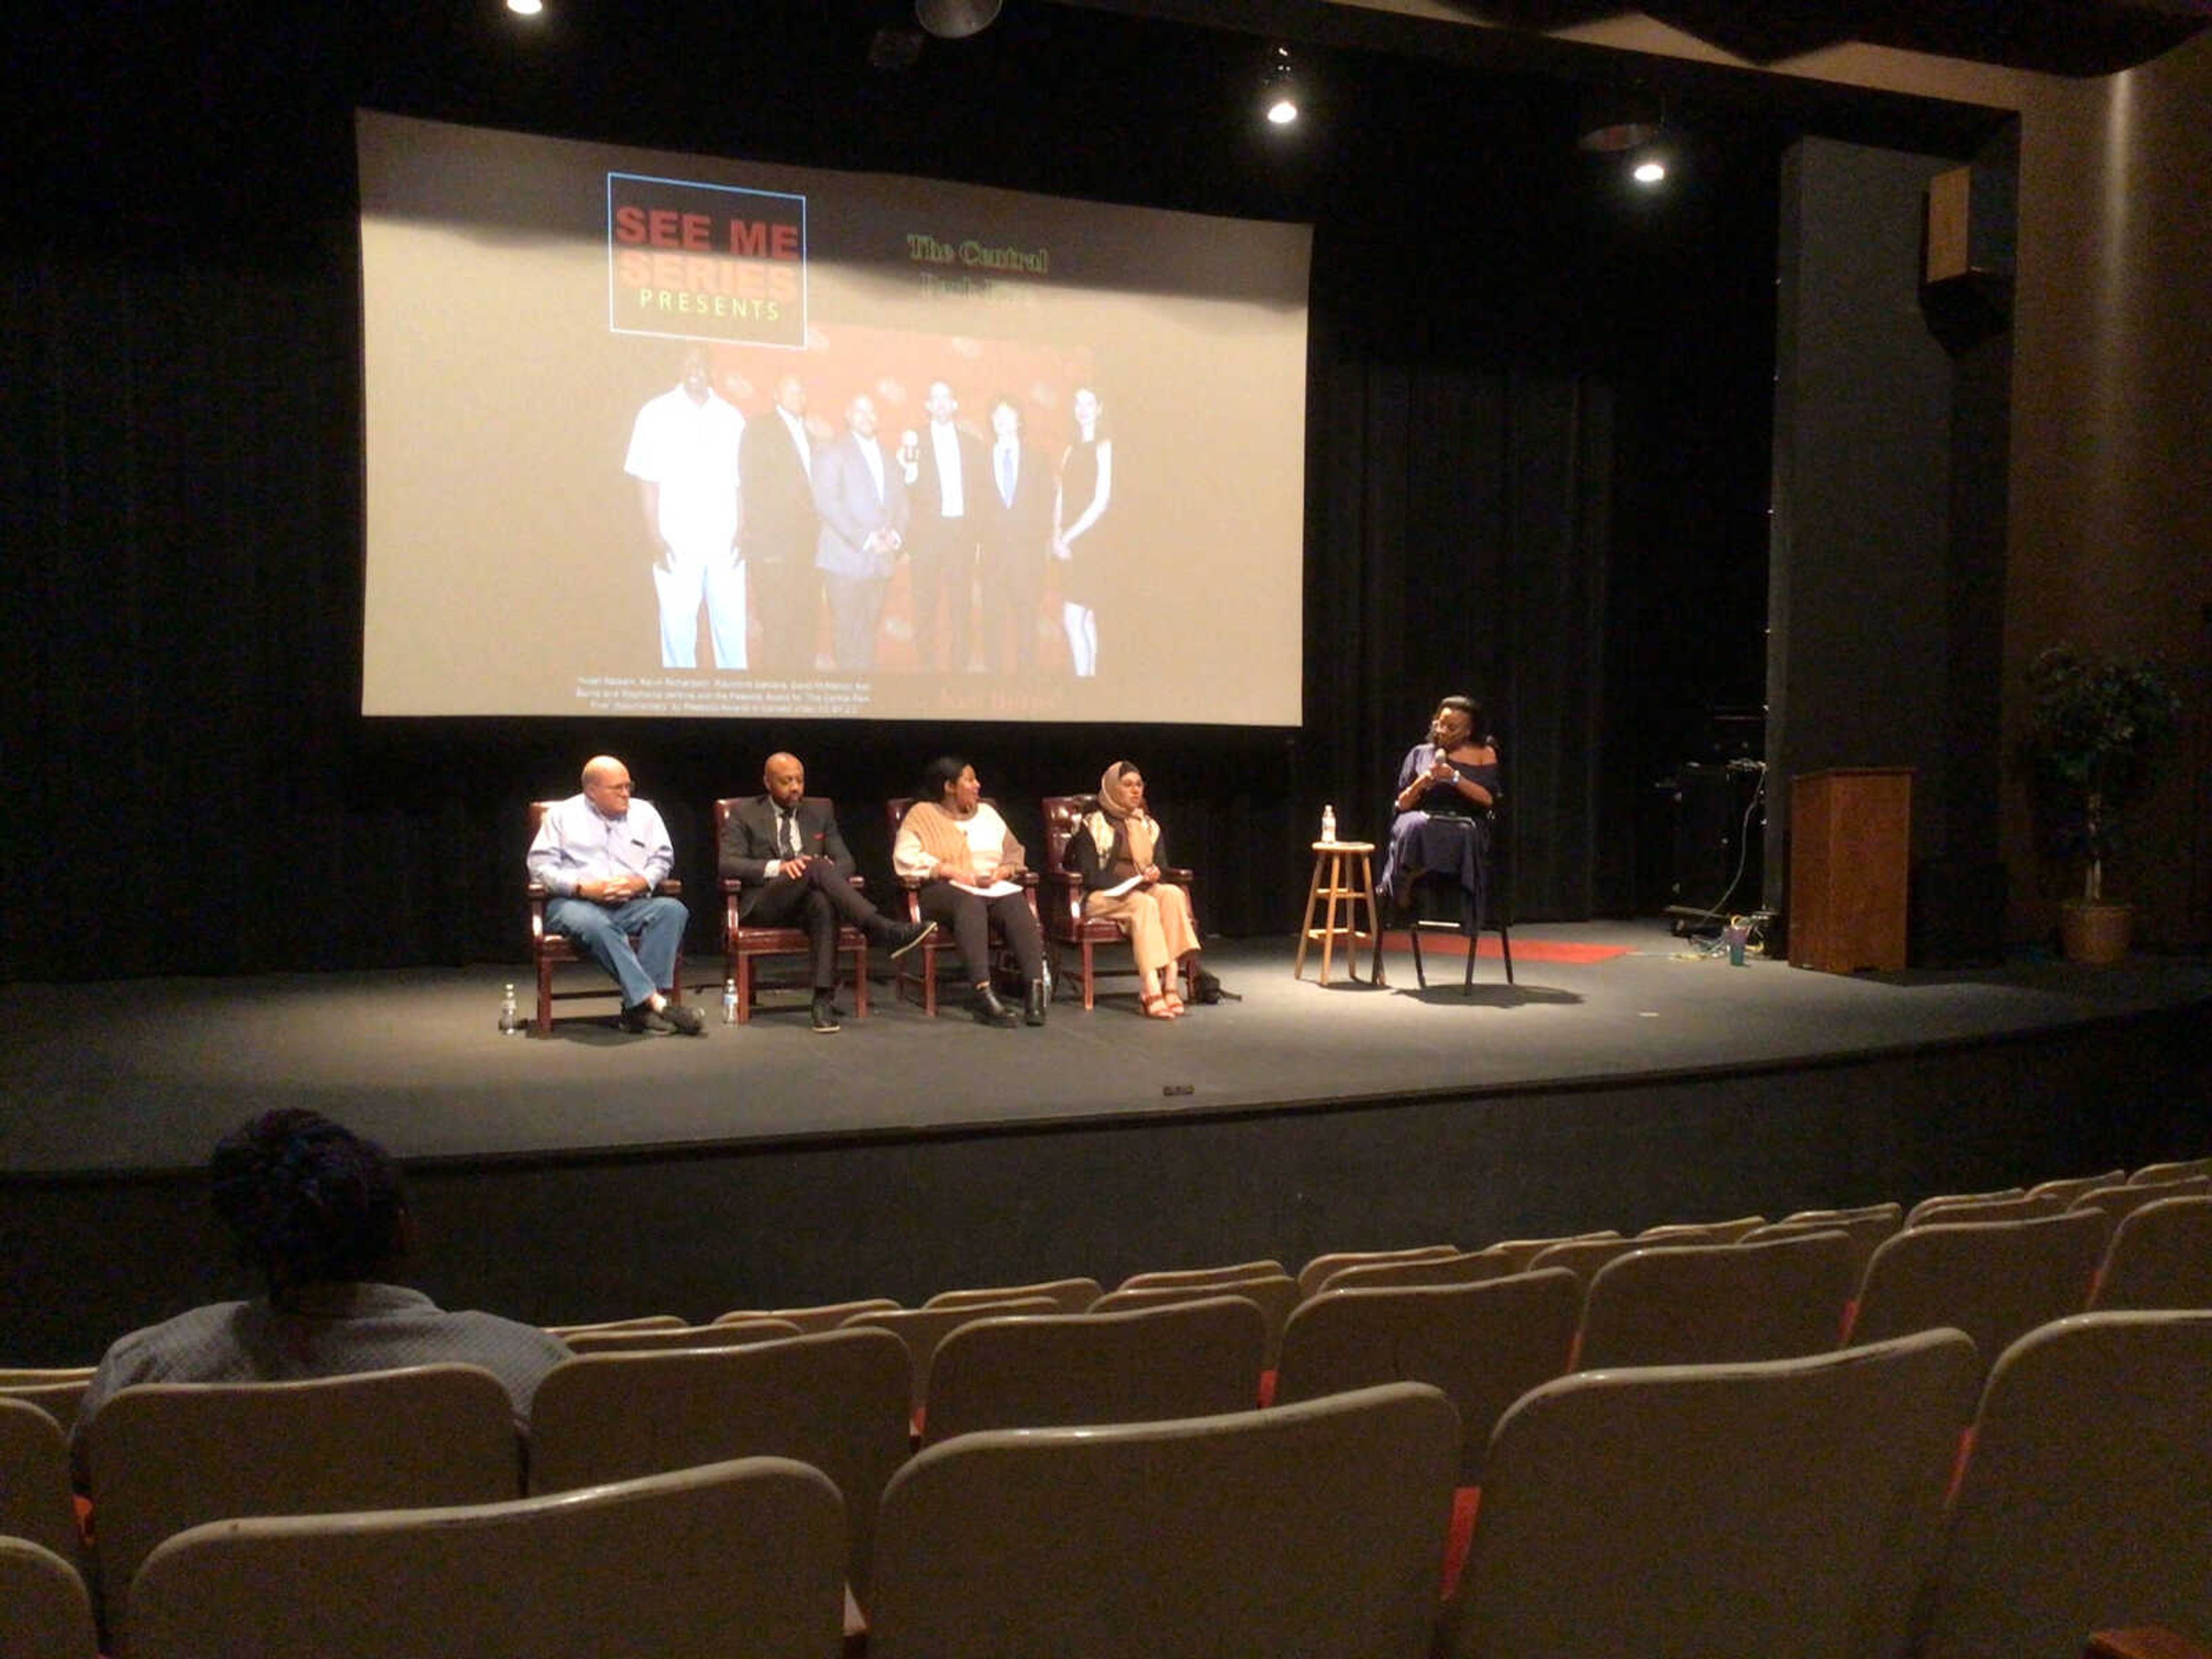 SEMO Mass Media Professor Jasmine Evans asks panelists questions at the See Me Series event. The "See Me Series" talked about the Ken Burns documentary "The Central Park Five".